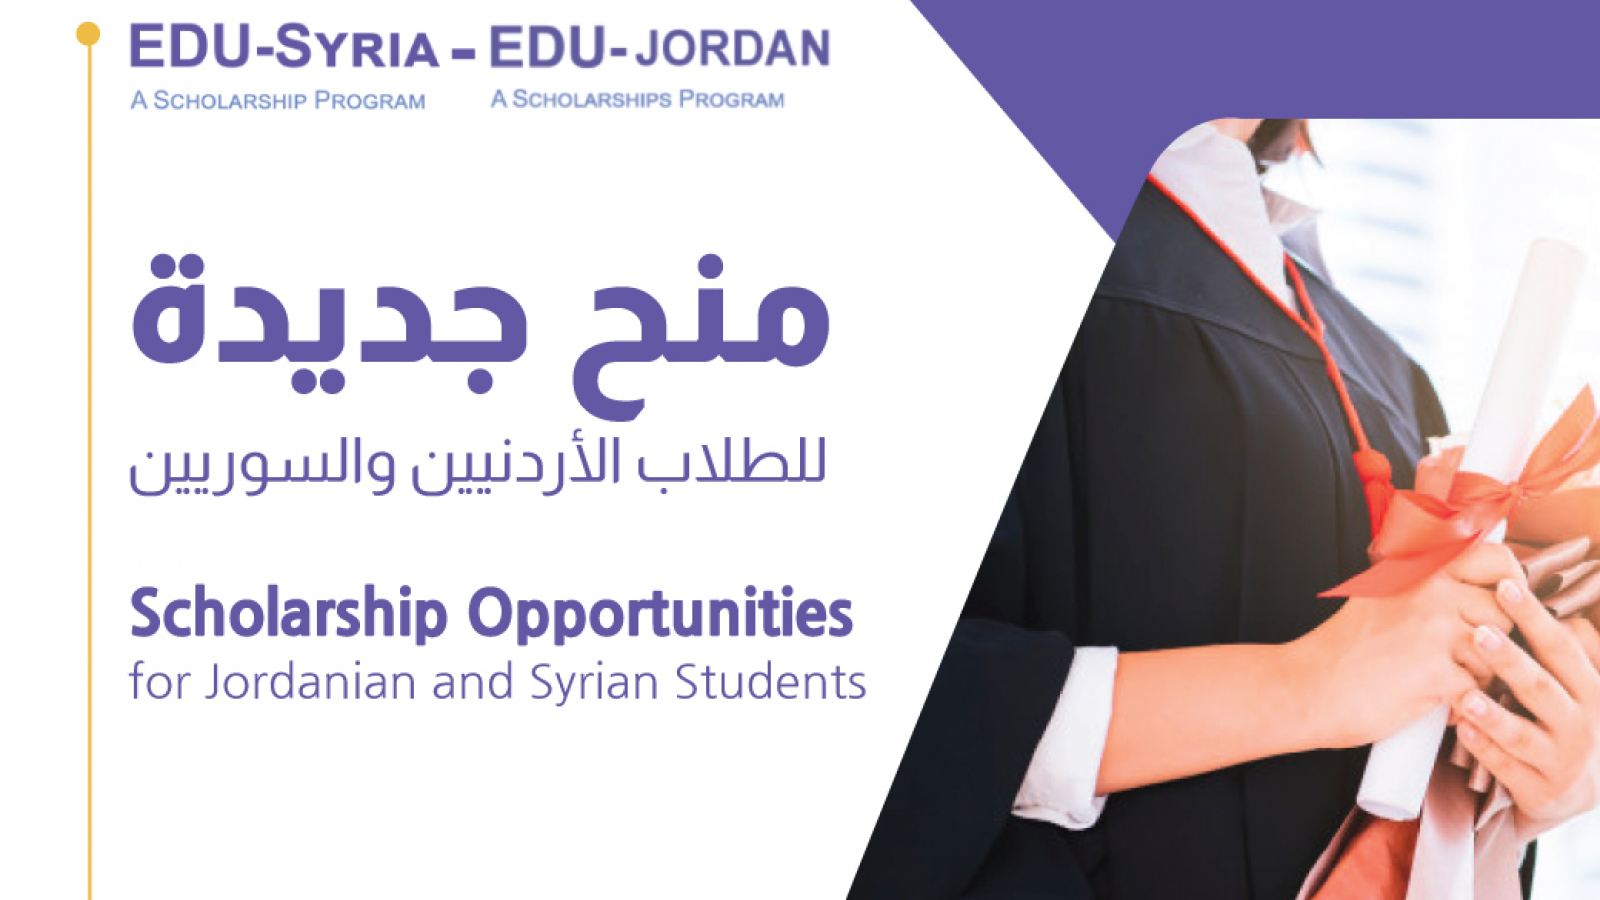 Scholarship opportunities for Jordanian and Syrians.jpg